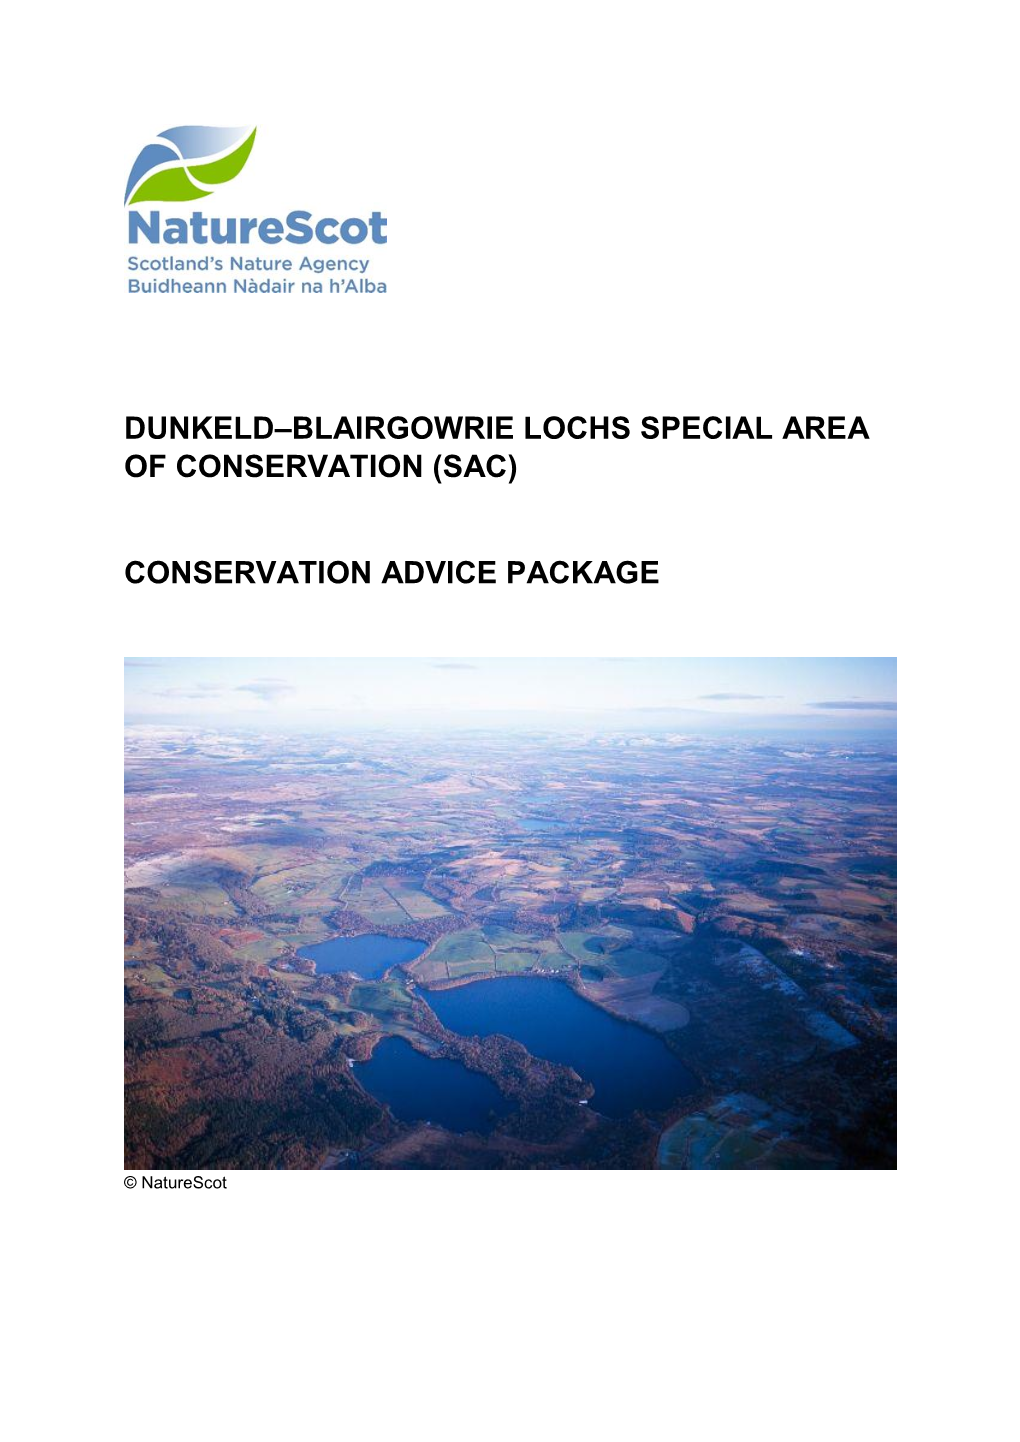 Dunkeld–Blairgowrie Lochs Special Area of Conservation (Sac)